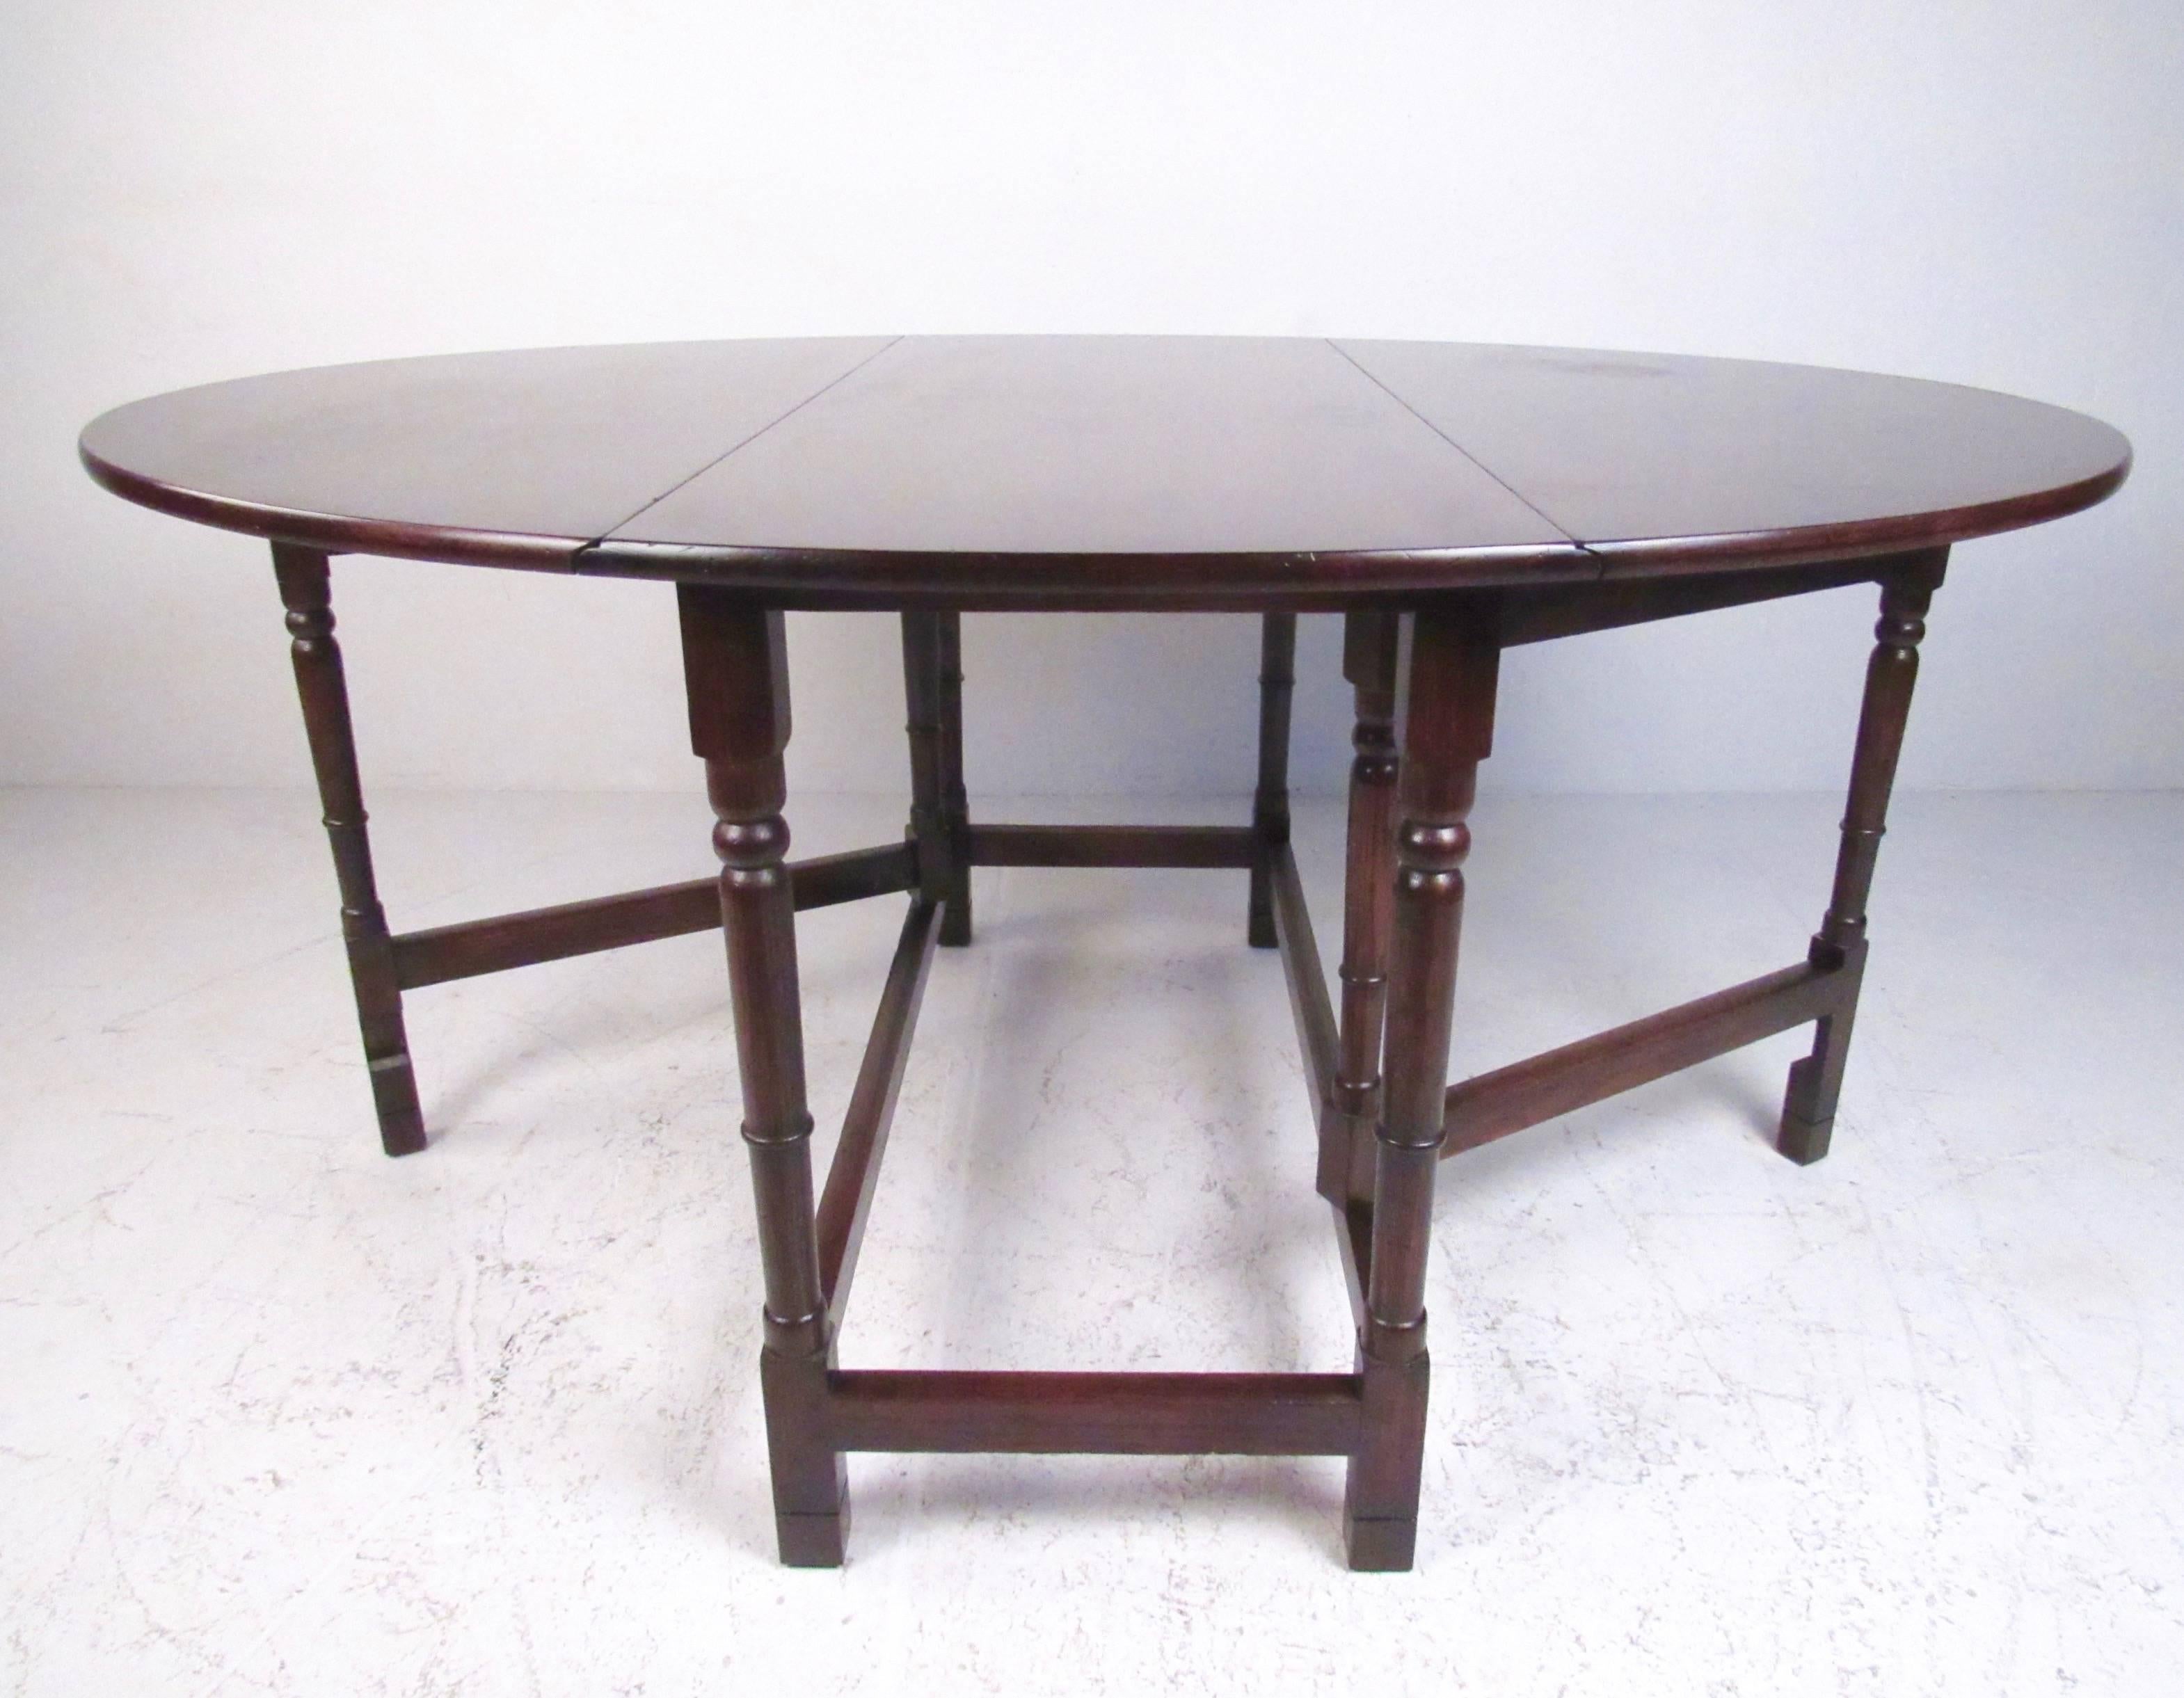 This stylish vintage modern table features sculpted gate leg base with spacious drop leaf tabletop. Expanding easily from 22 inches wide to 54 wide, this oval dining table makes a stately impression in any interior. Wonderful vintage patina with